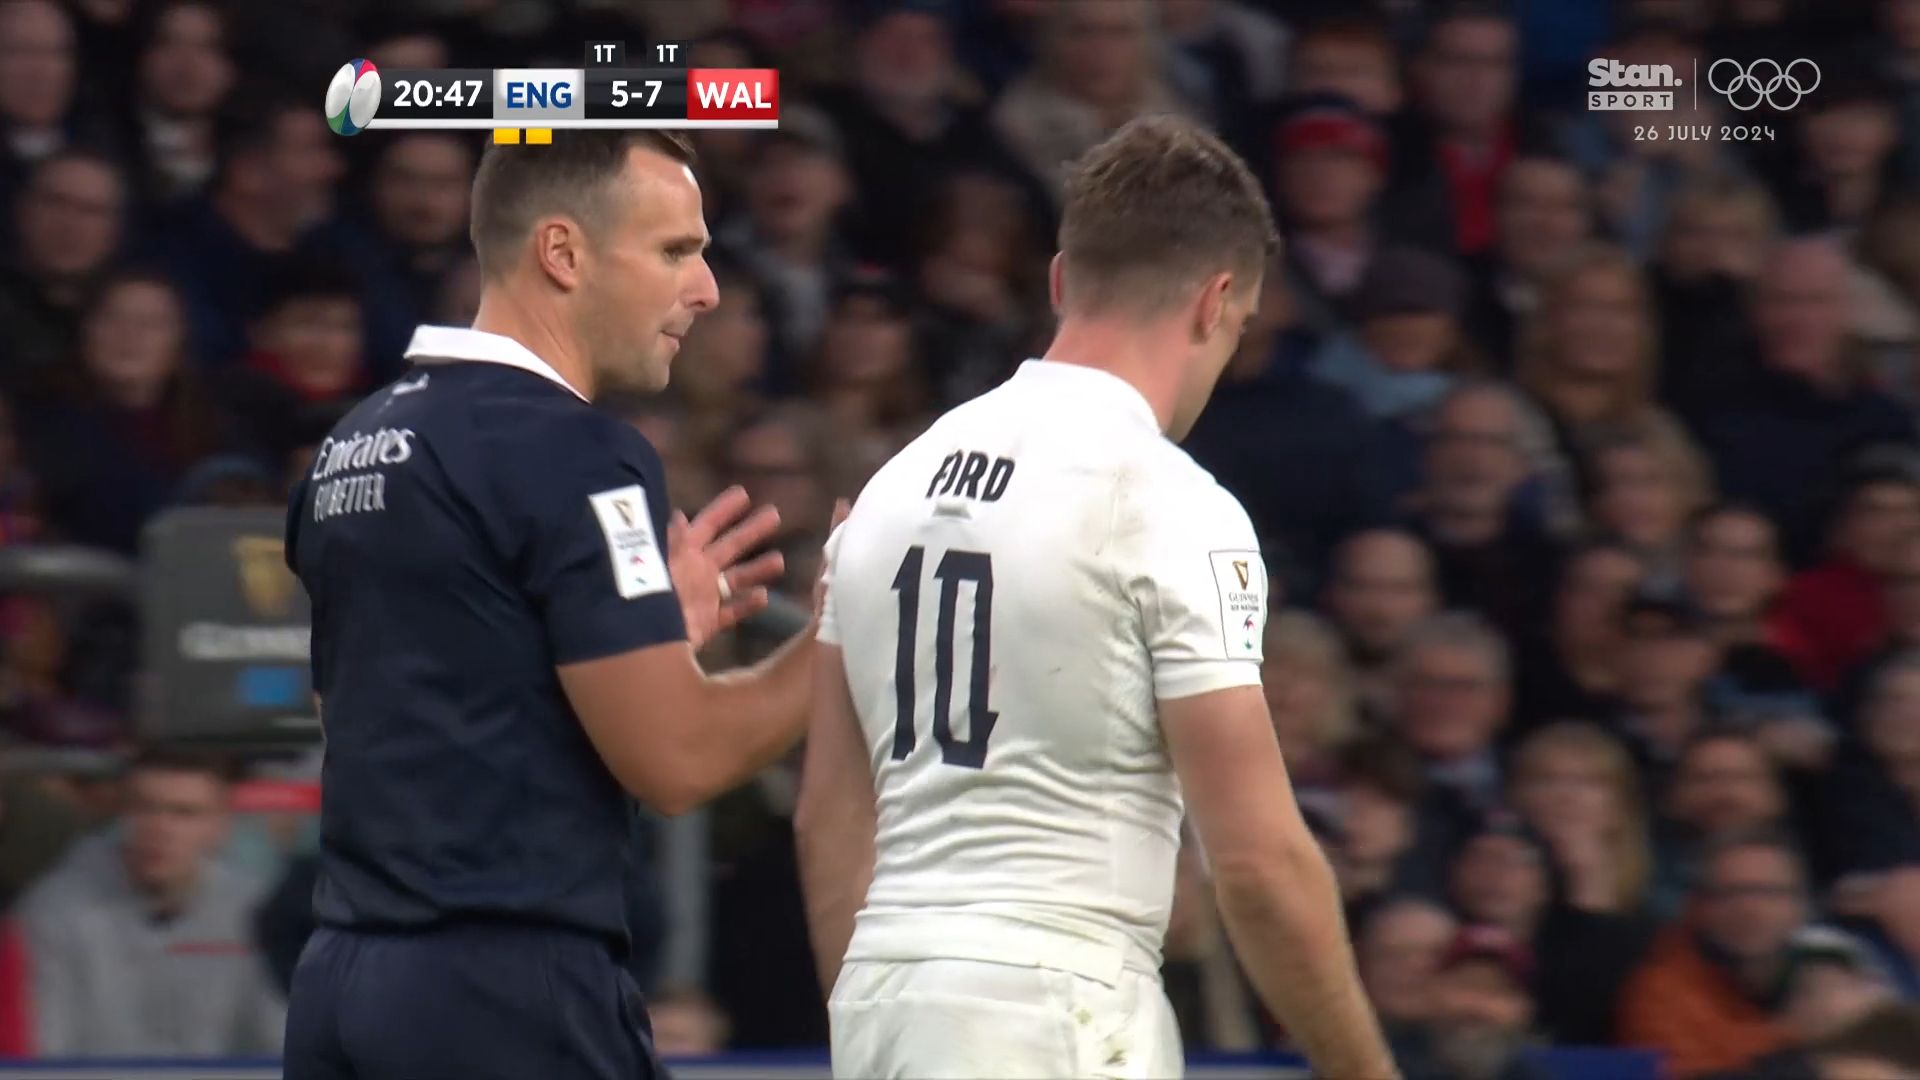 'Doesn't make sense': Rugby's rules questioned over innocuous step in Six Nations controversy